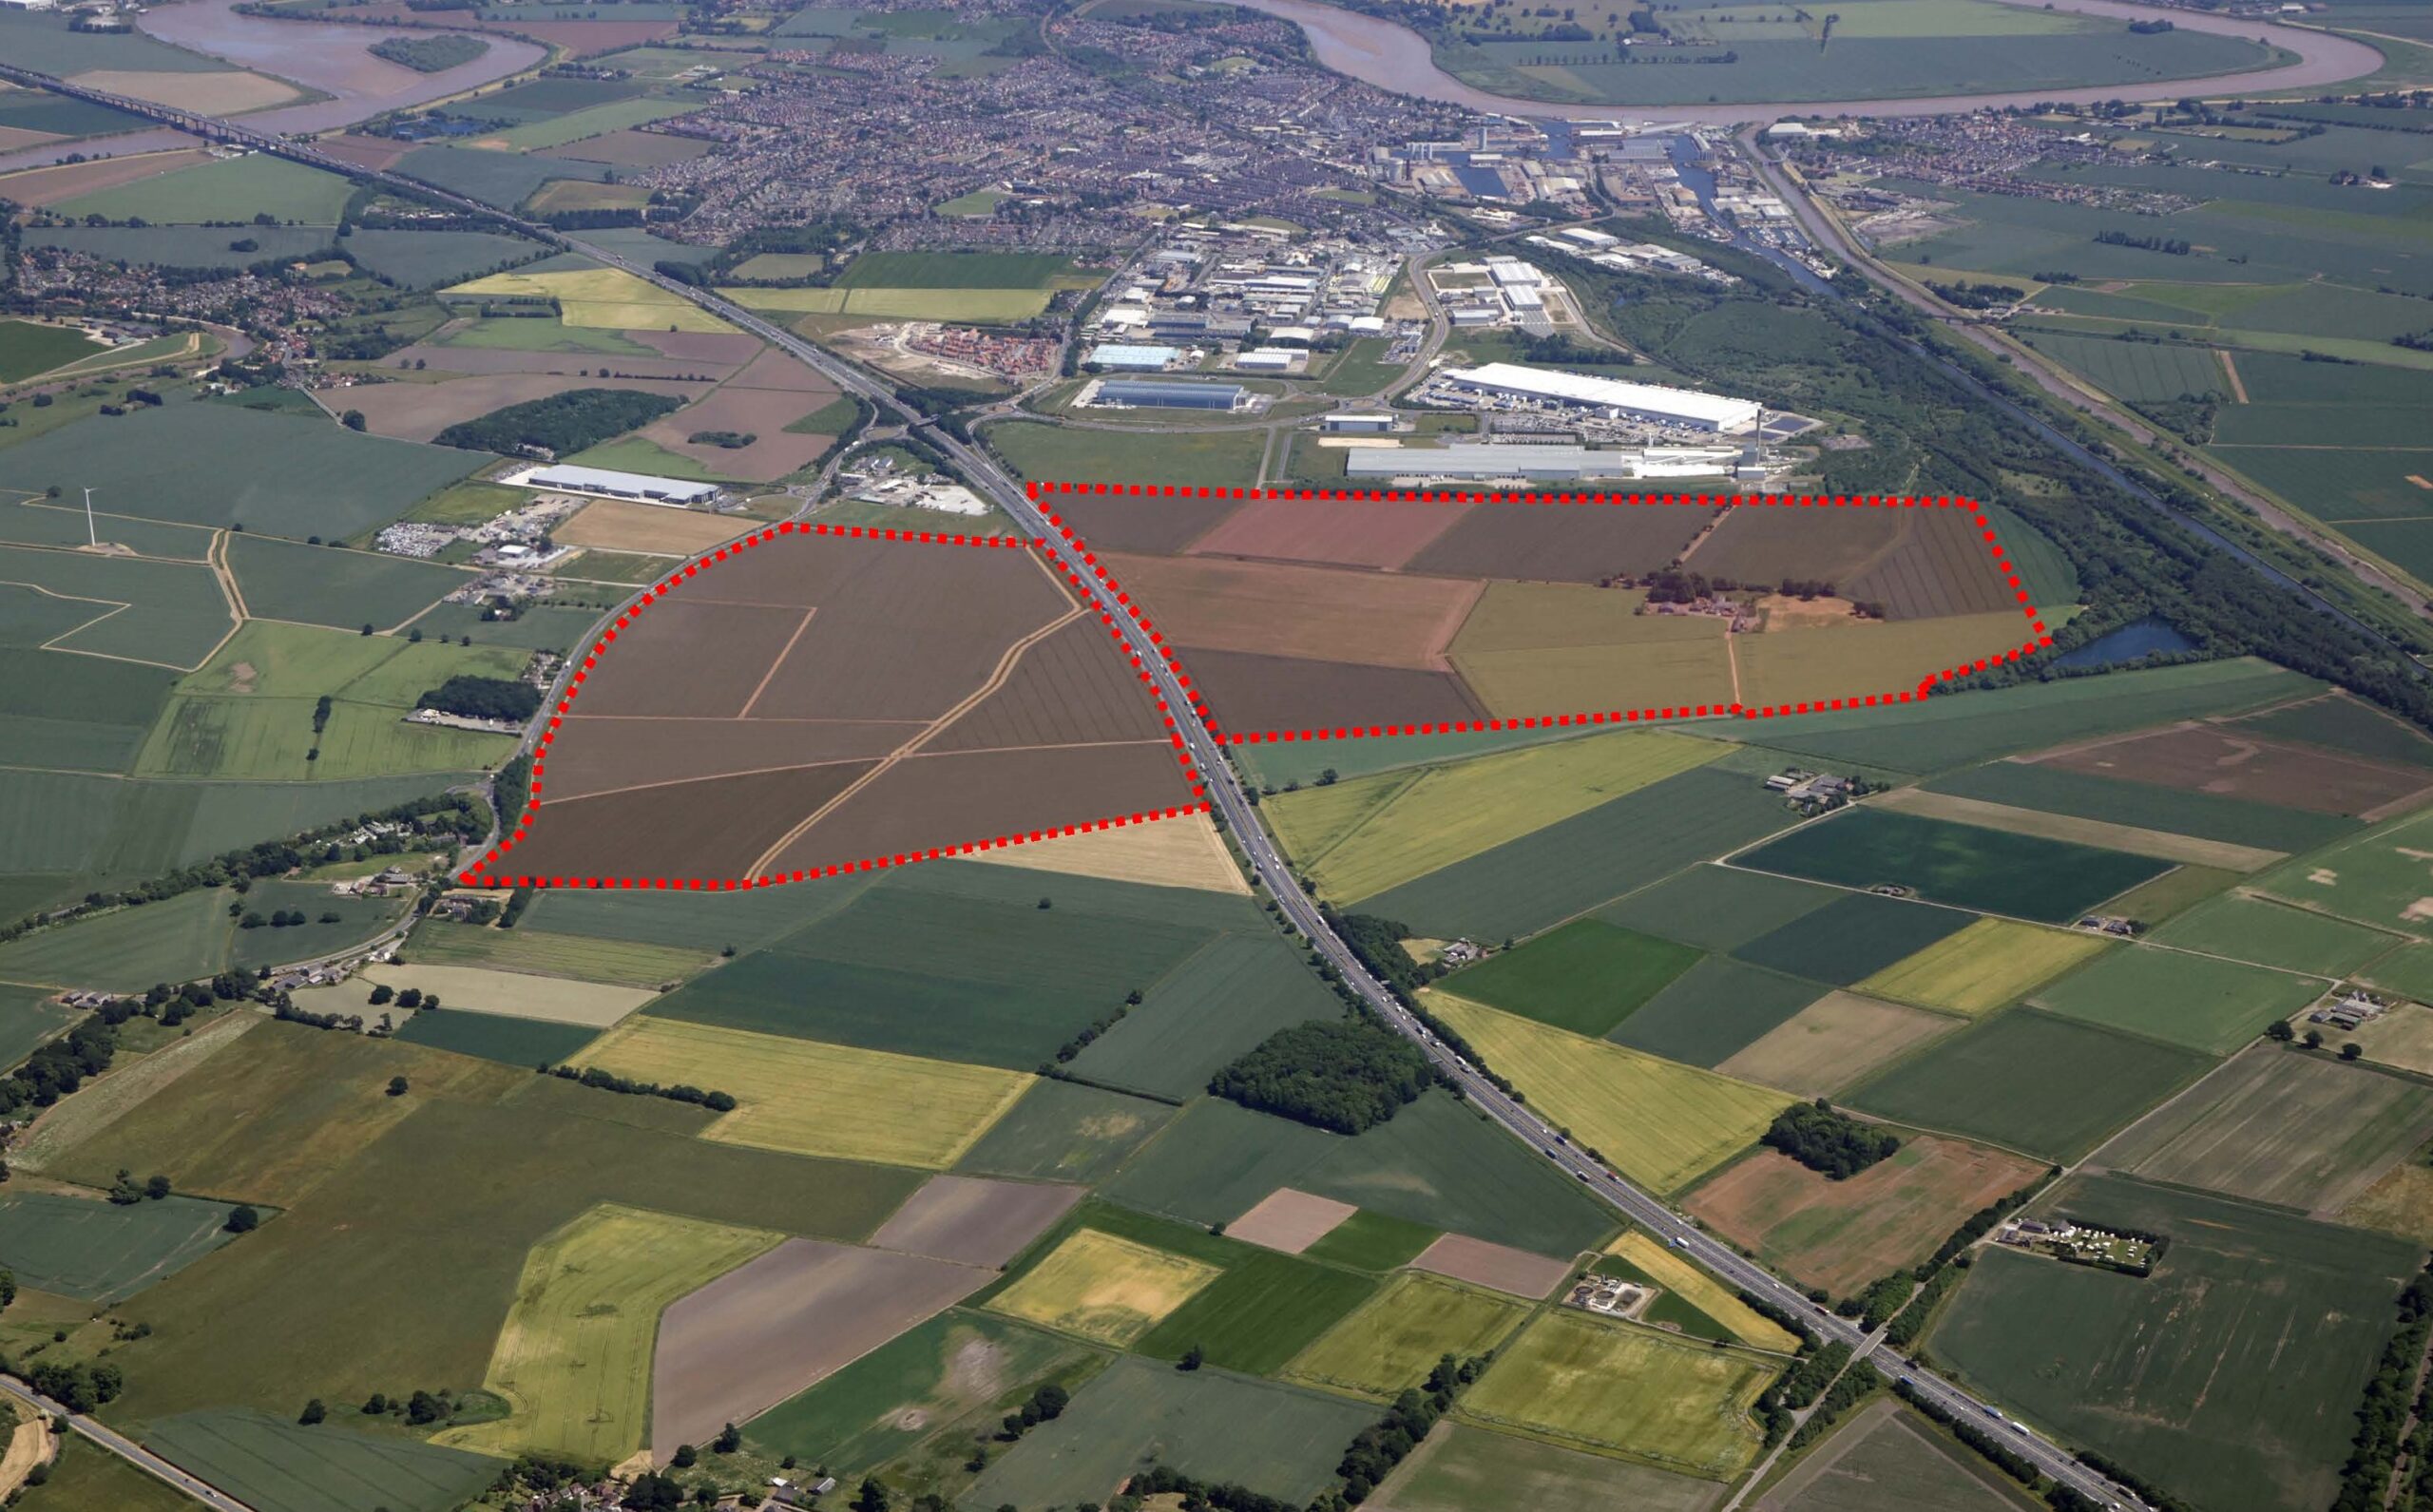 Goole freeport tax site submitted to Government to unlock investment opportunities